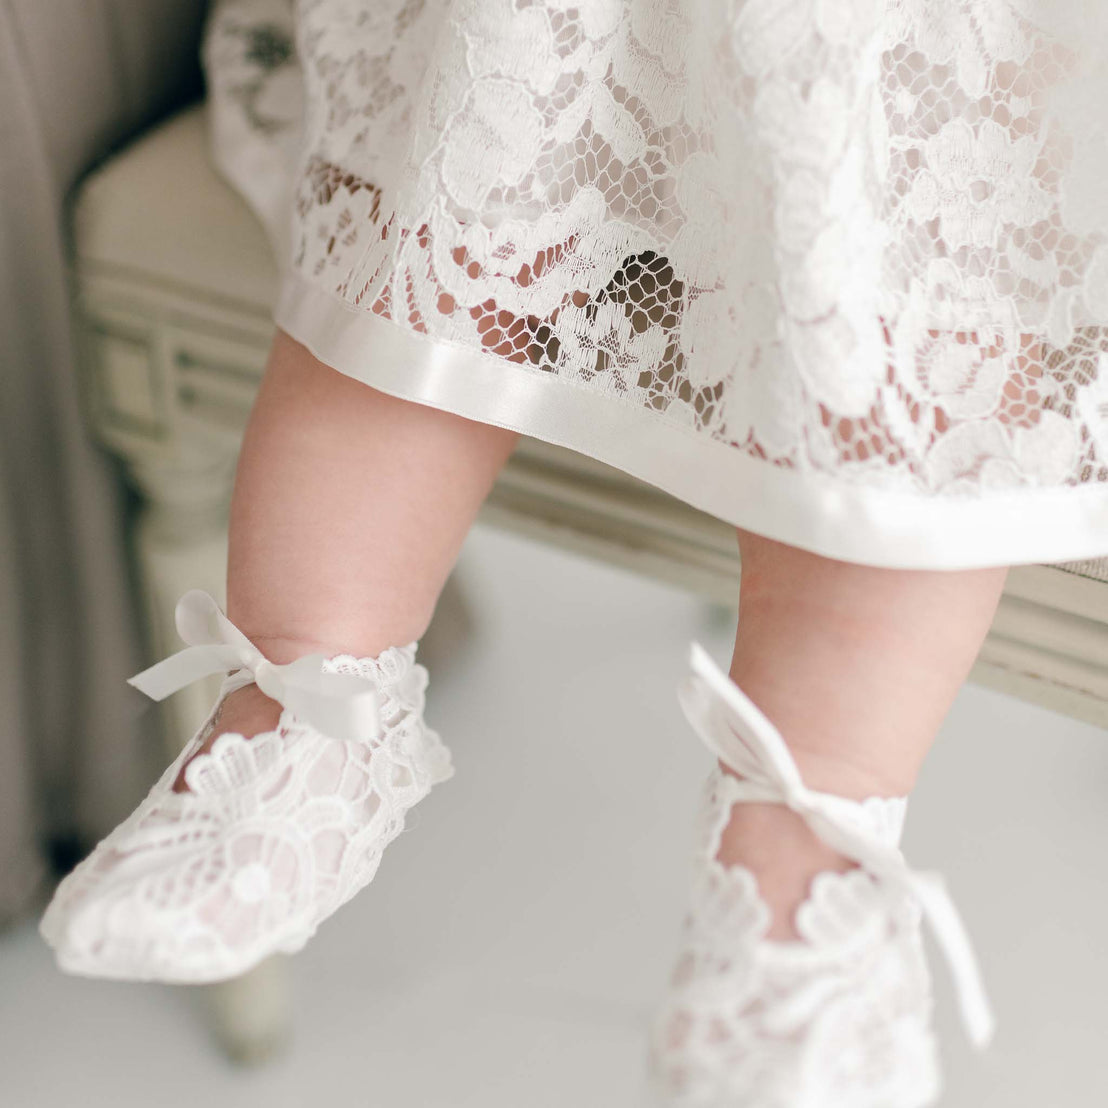 Close-up of a baby's feet dressed in the Rose Booties adorned with white silk ribbon ties, positioned above a wooden floor.